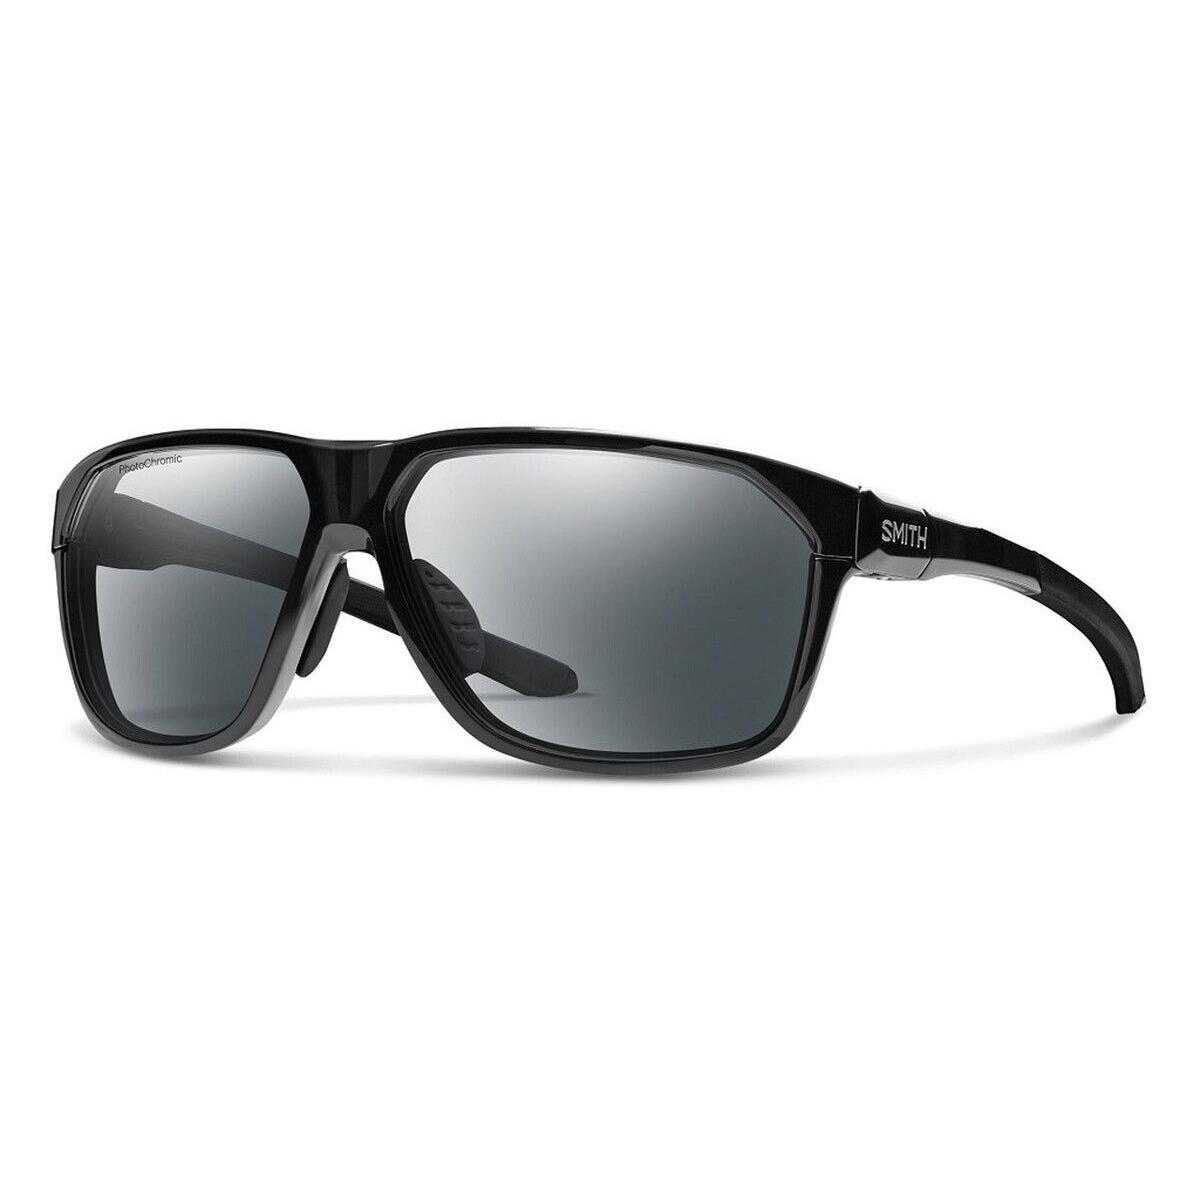 Smith Leadout Pivlock Sunglasses Black Frame Photochromic Clear to Gray Lens